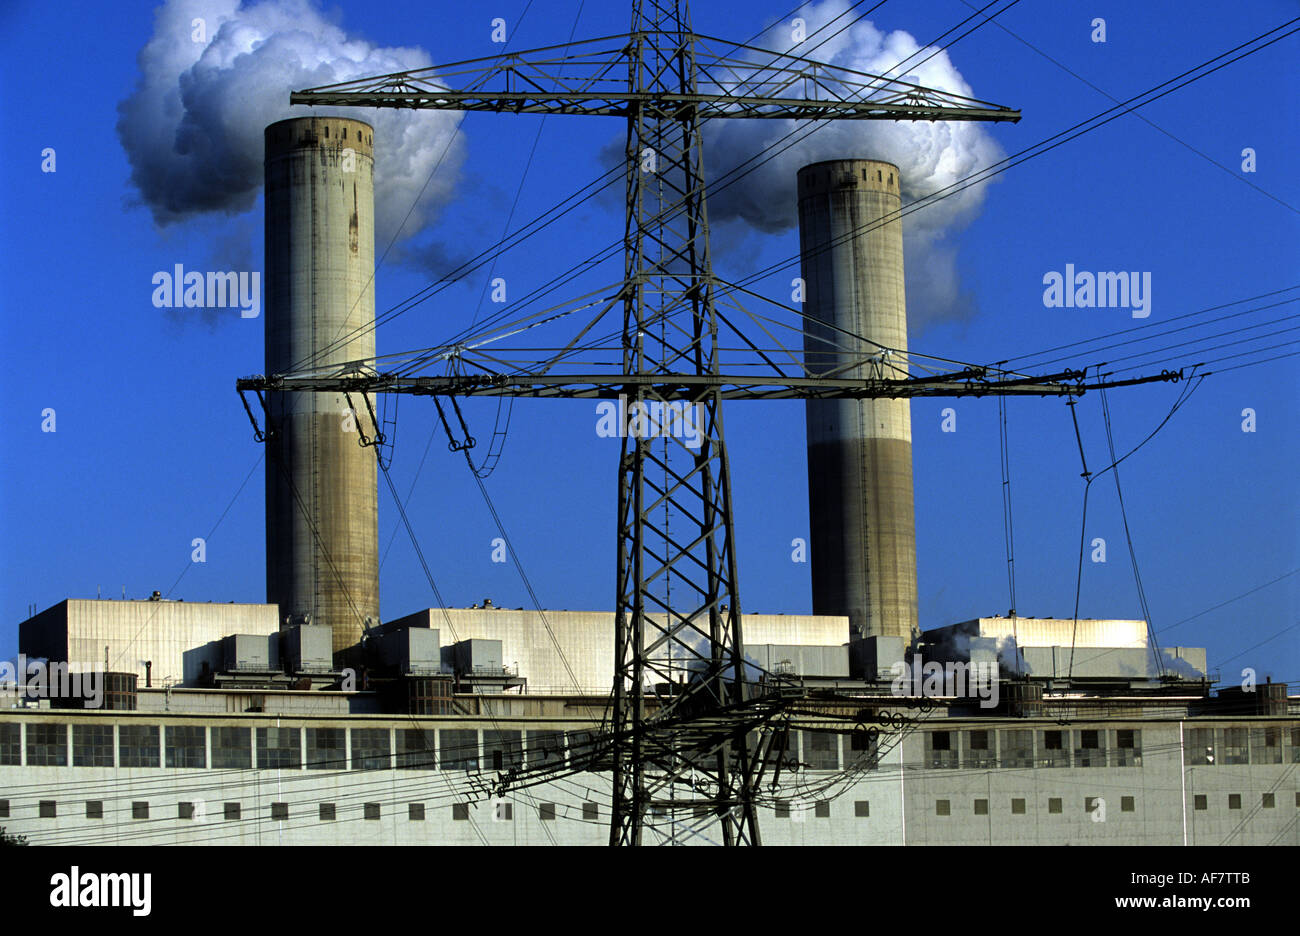 Frimmersodrf coal-fired power station, Germany. Stock Photo